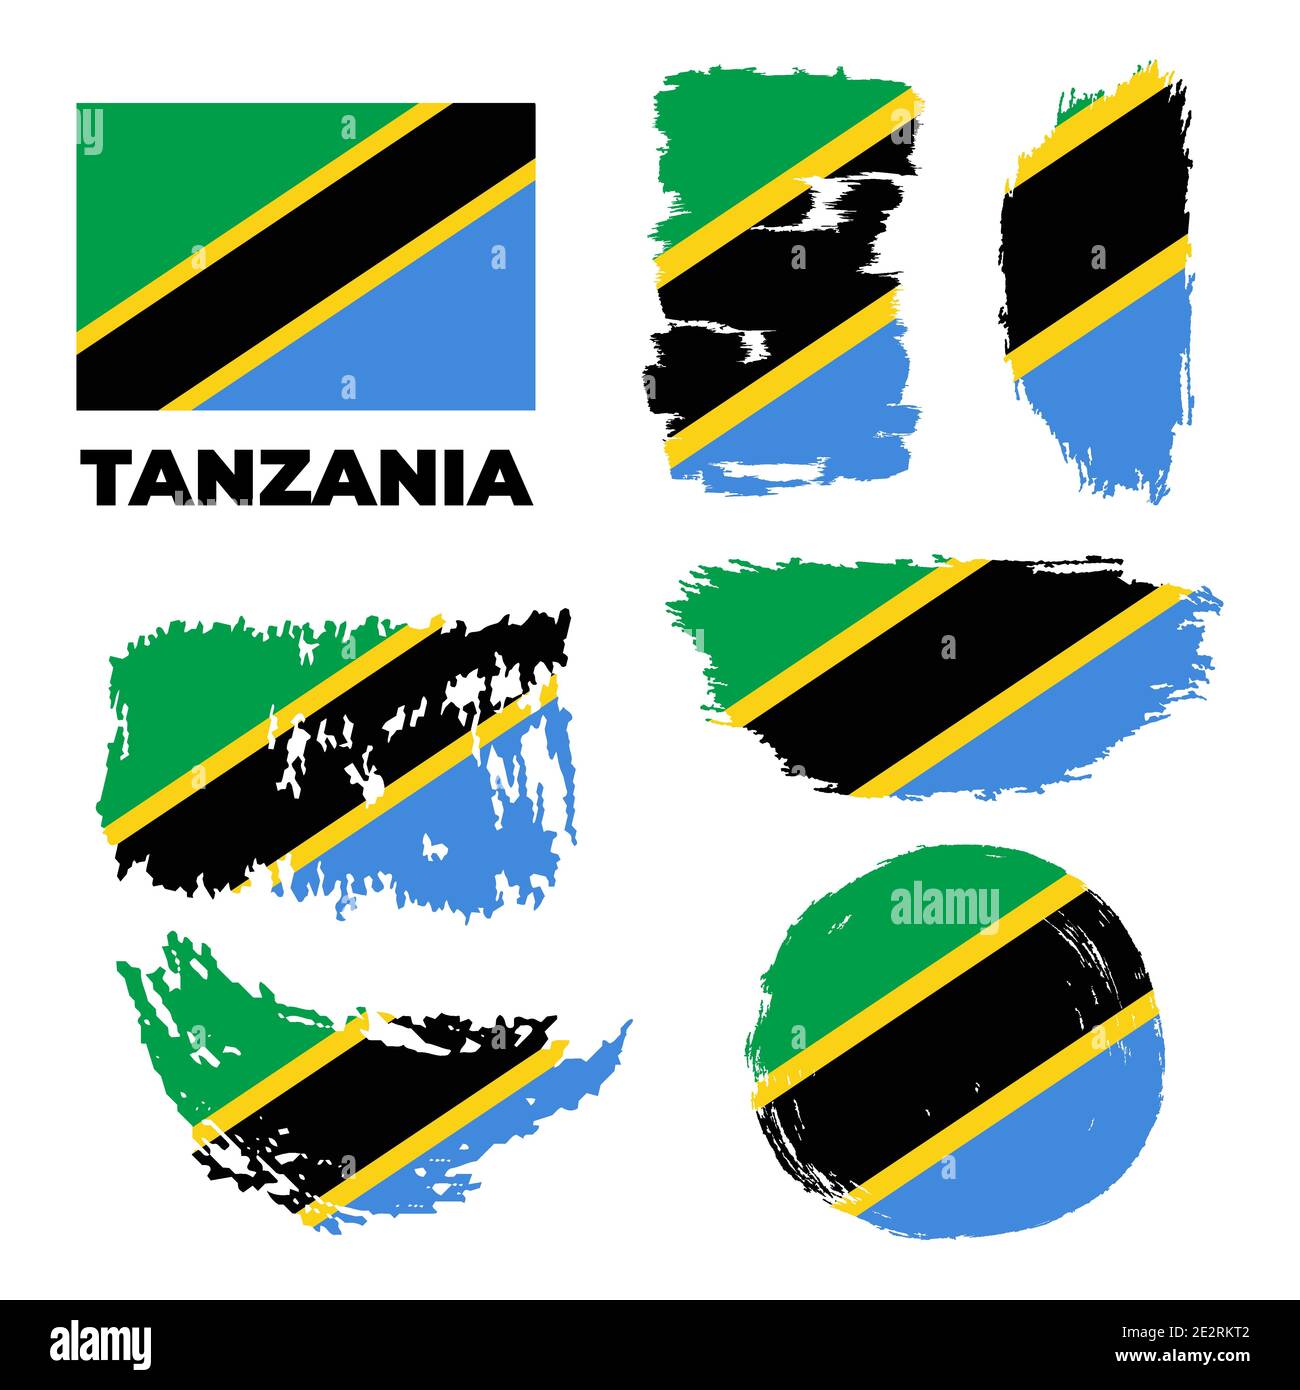 Tanzania national flag created in grunge style Stock Vector